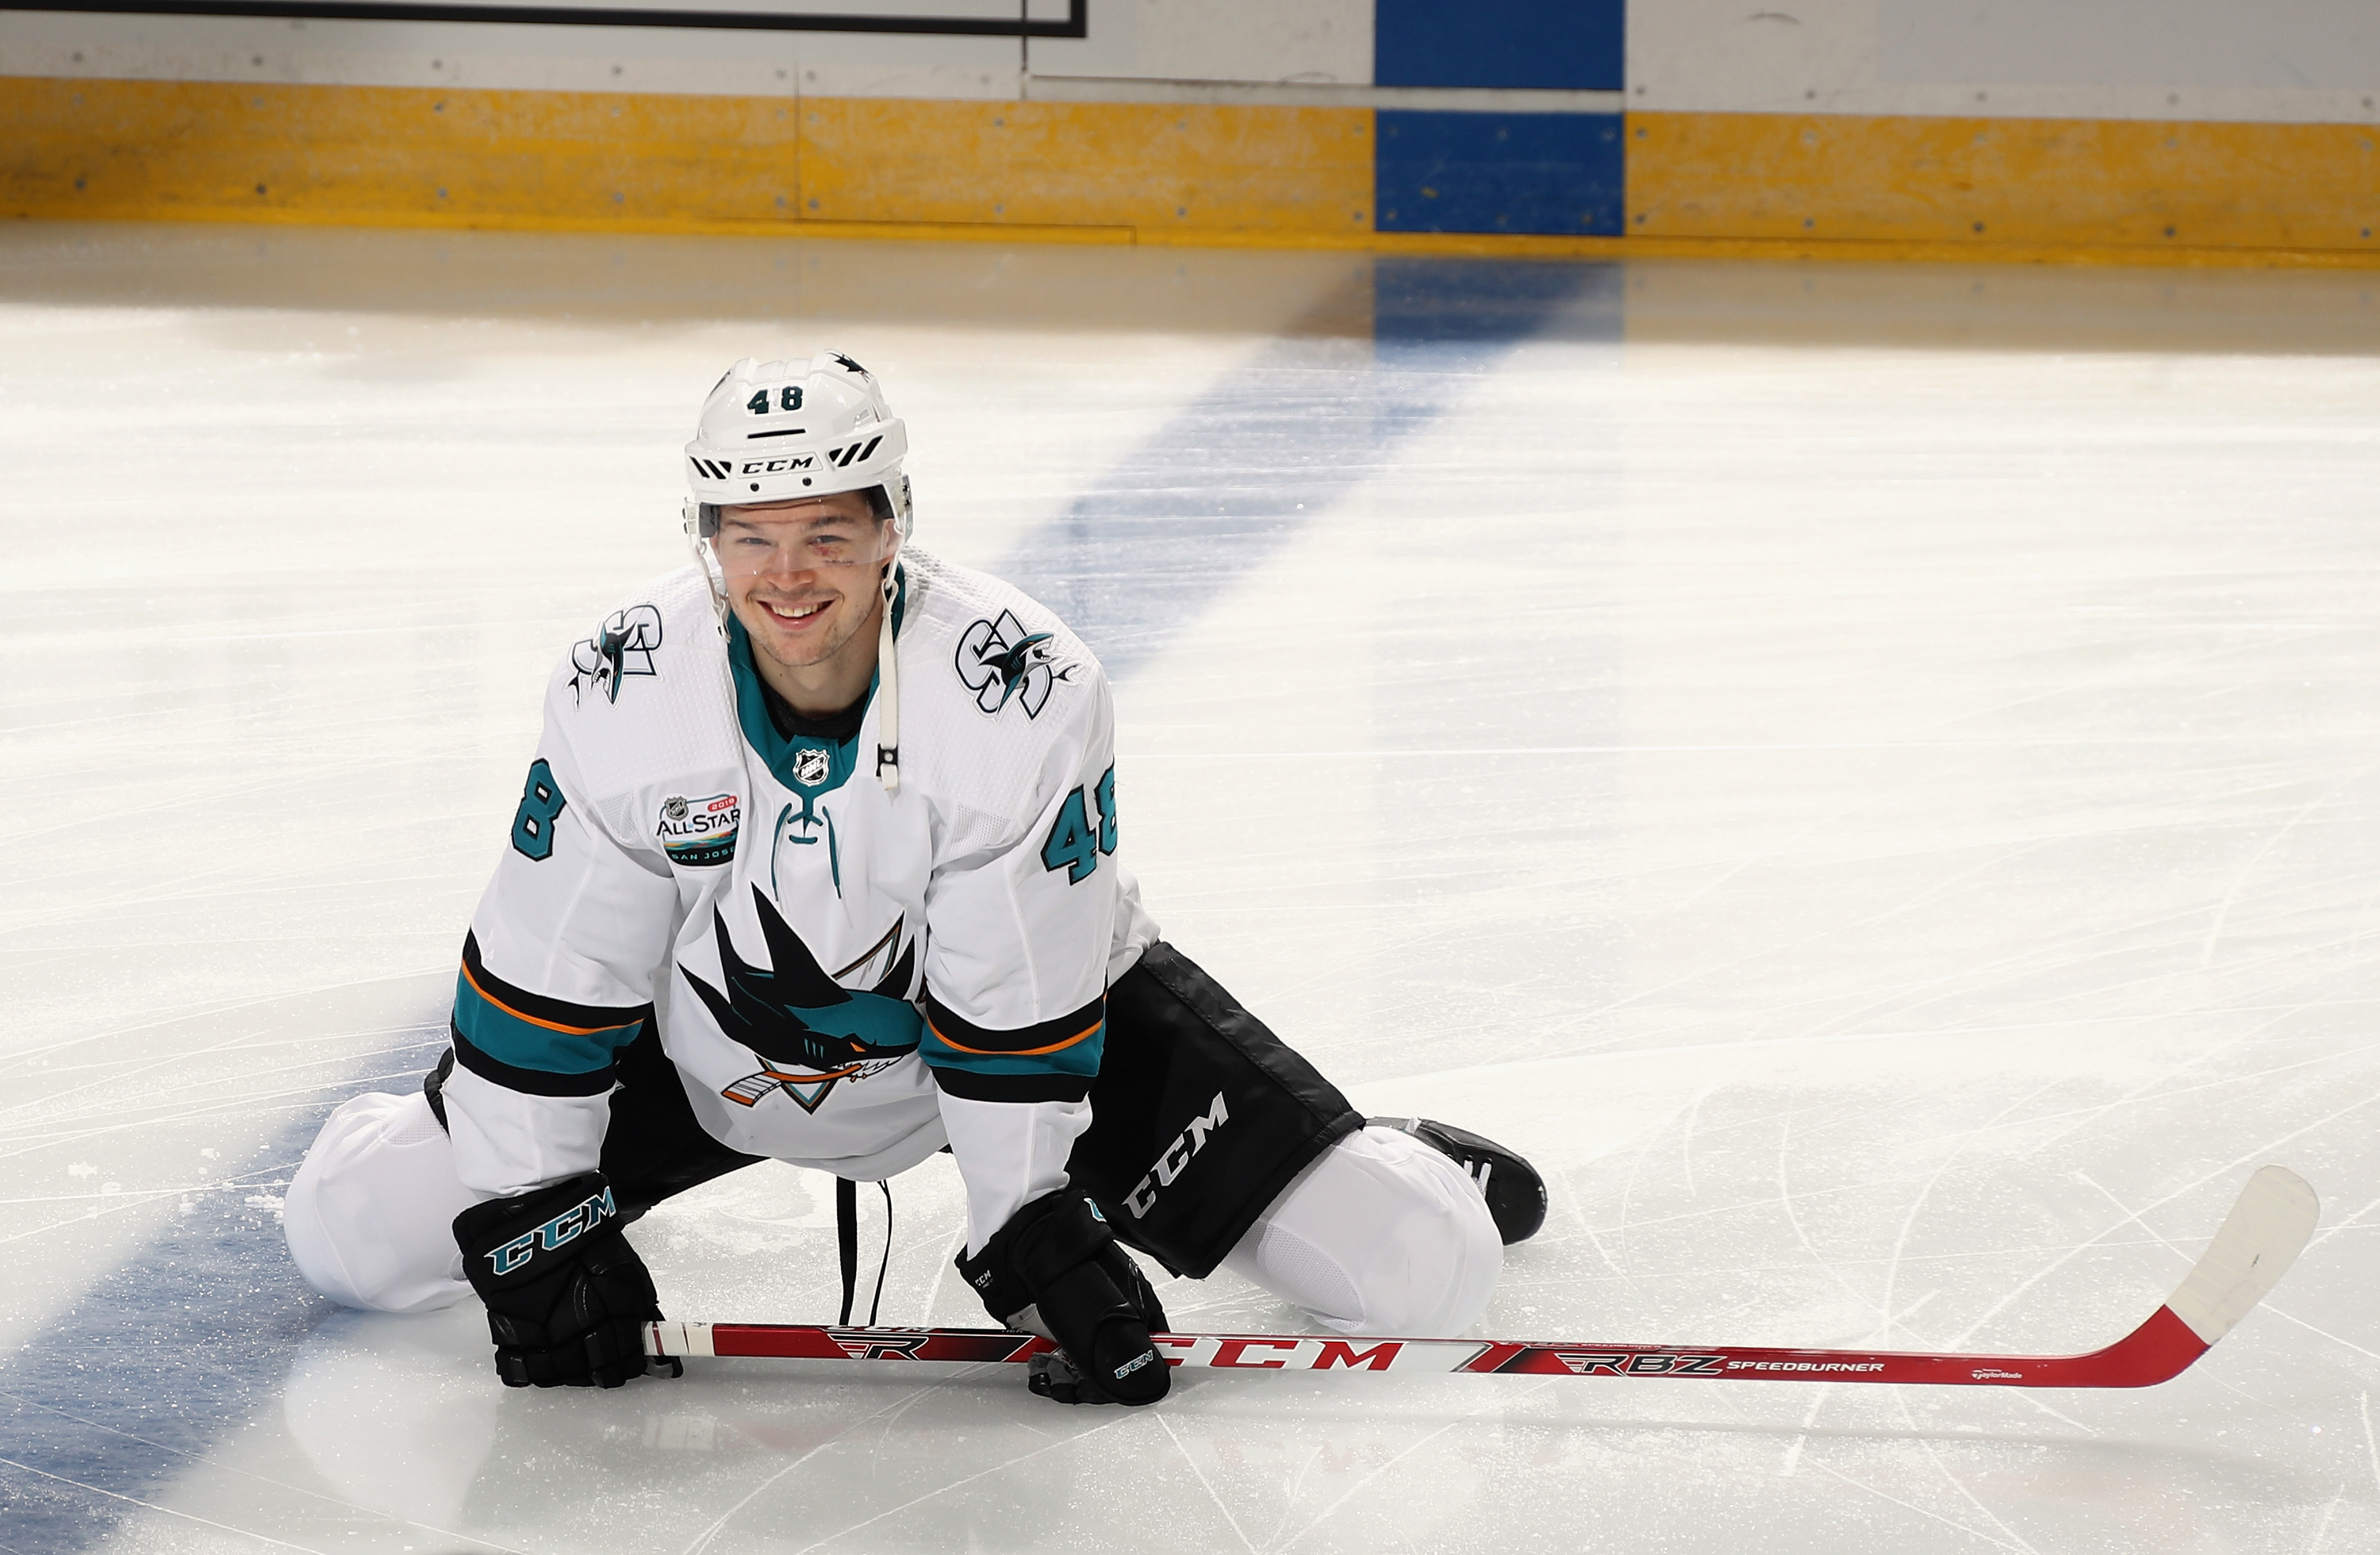 NEWARK, NJ - OCTOBER 14: Tomas Hertl #48 of the San Jose Sharks stretches in warm-ups prior to the game against the New Jersey Devils at the Prudential Center on October 14, 2018 in Newark, New Jersey.